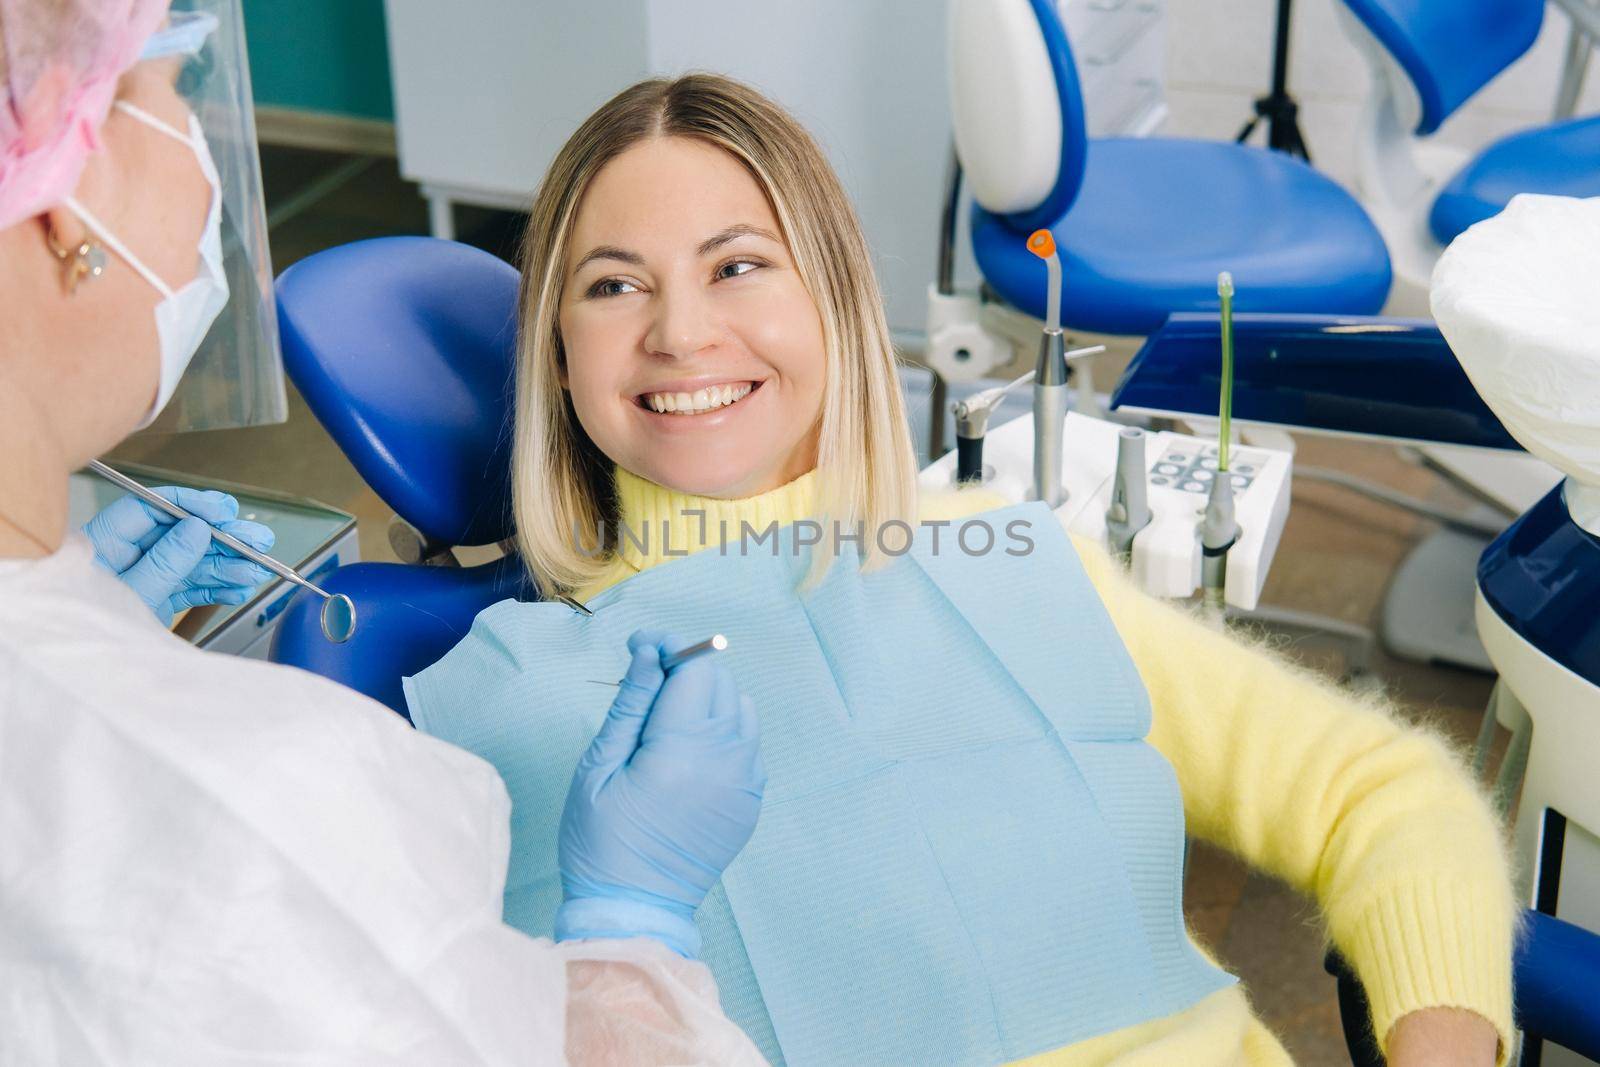 The girl smiles at the dentist and looks at her.